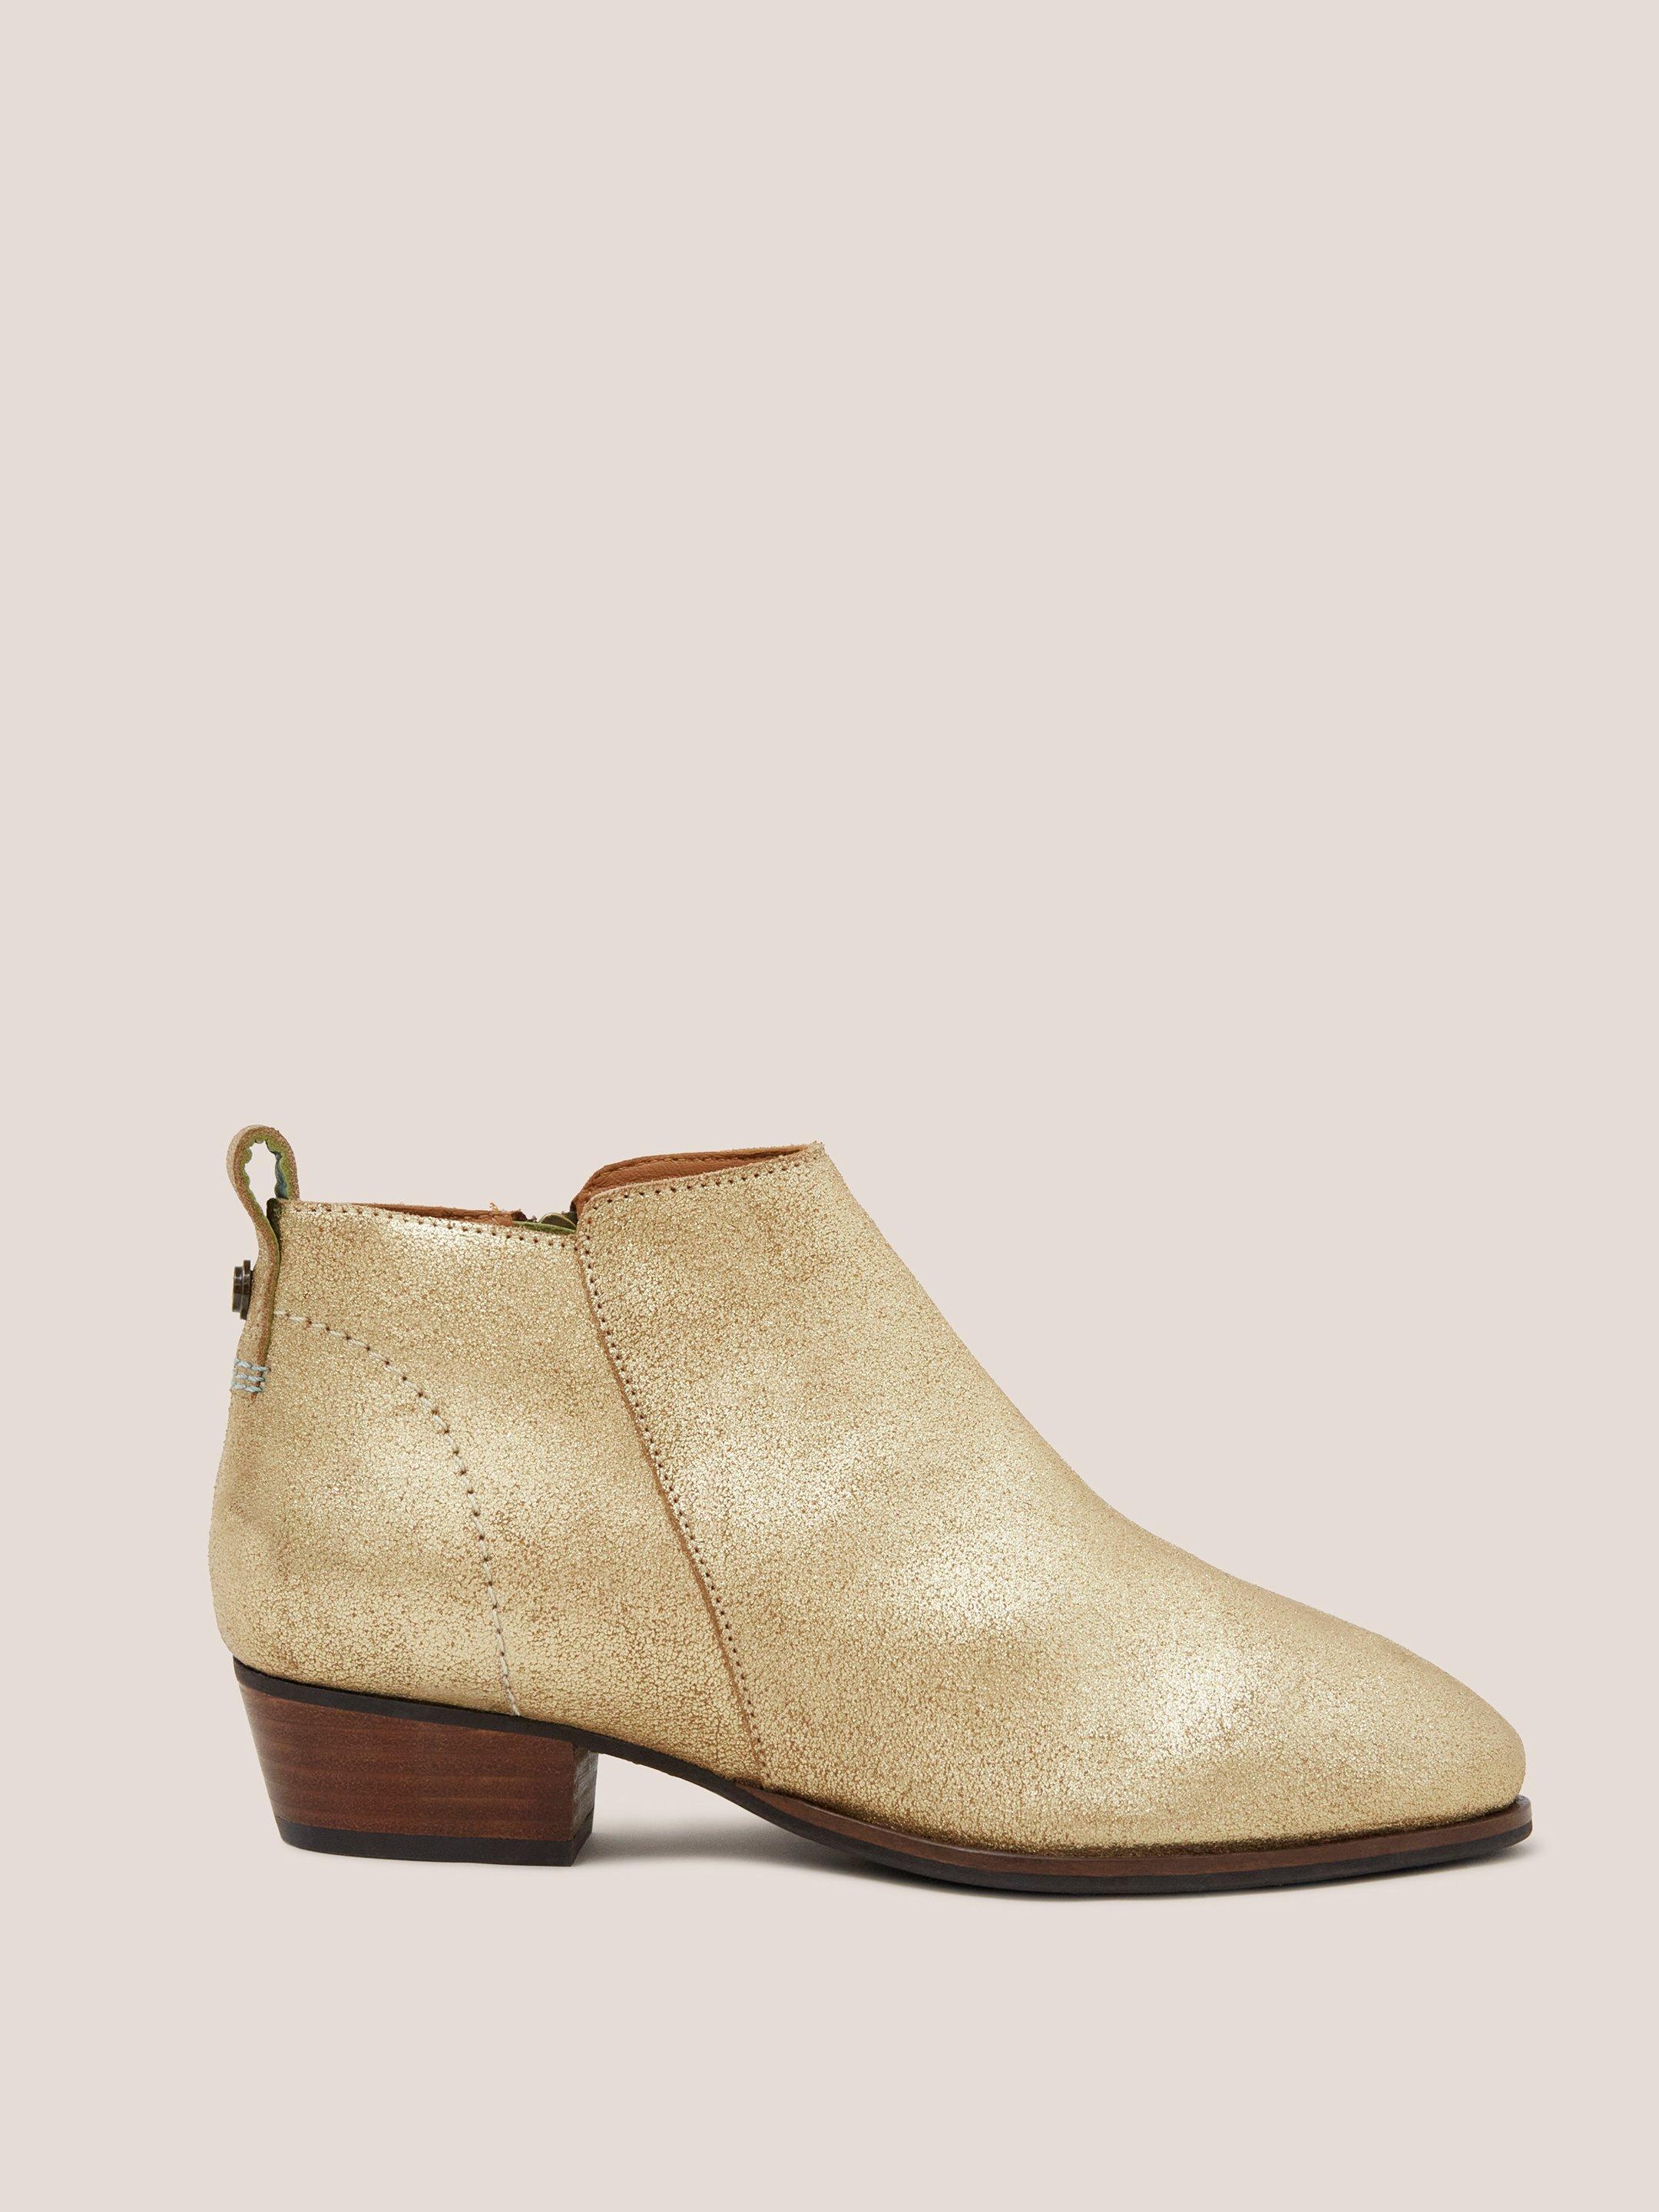 Leather Willow Ankle Boot